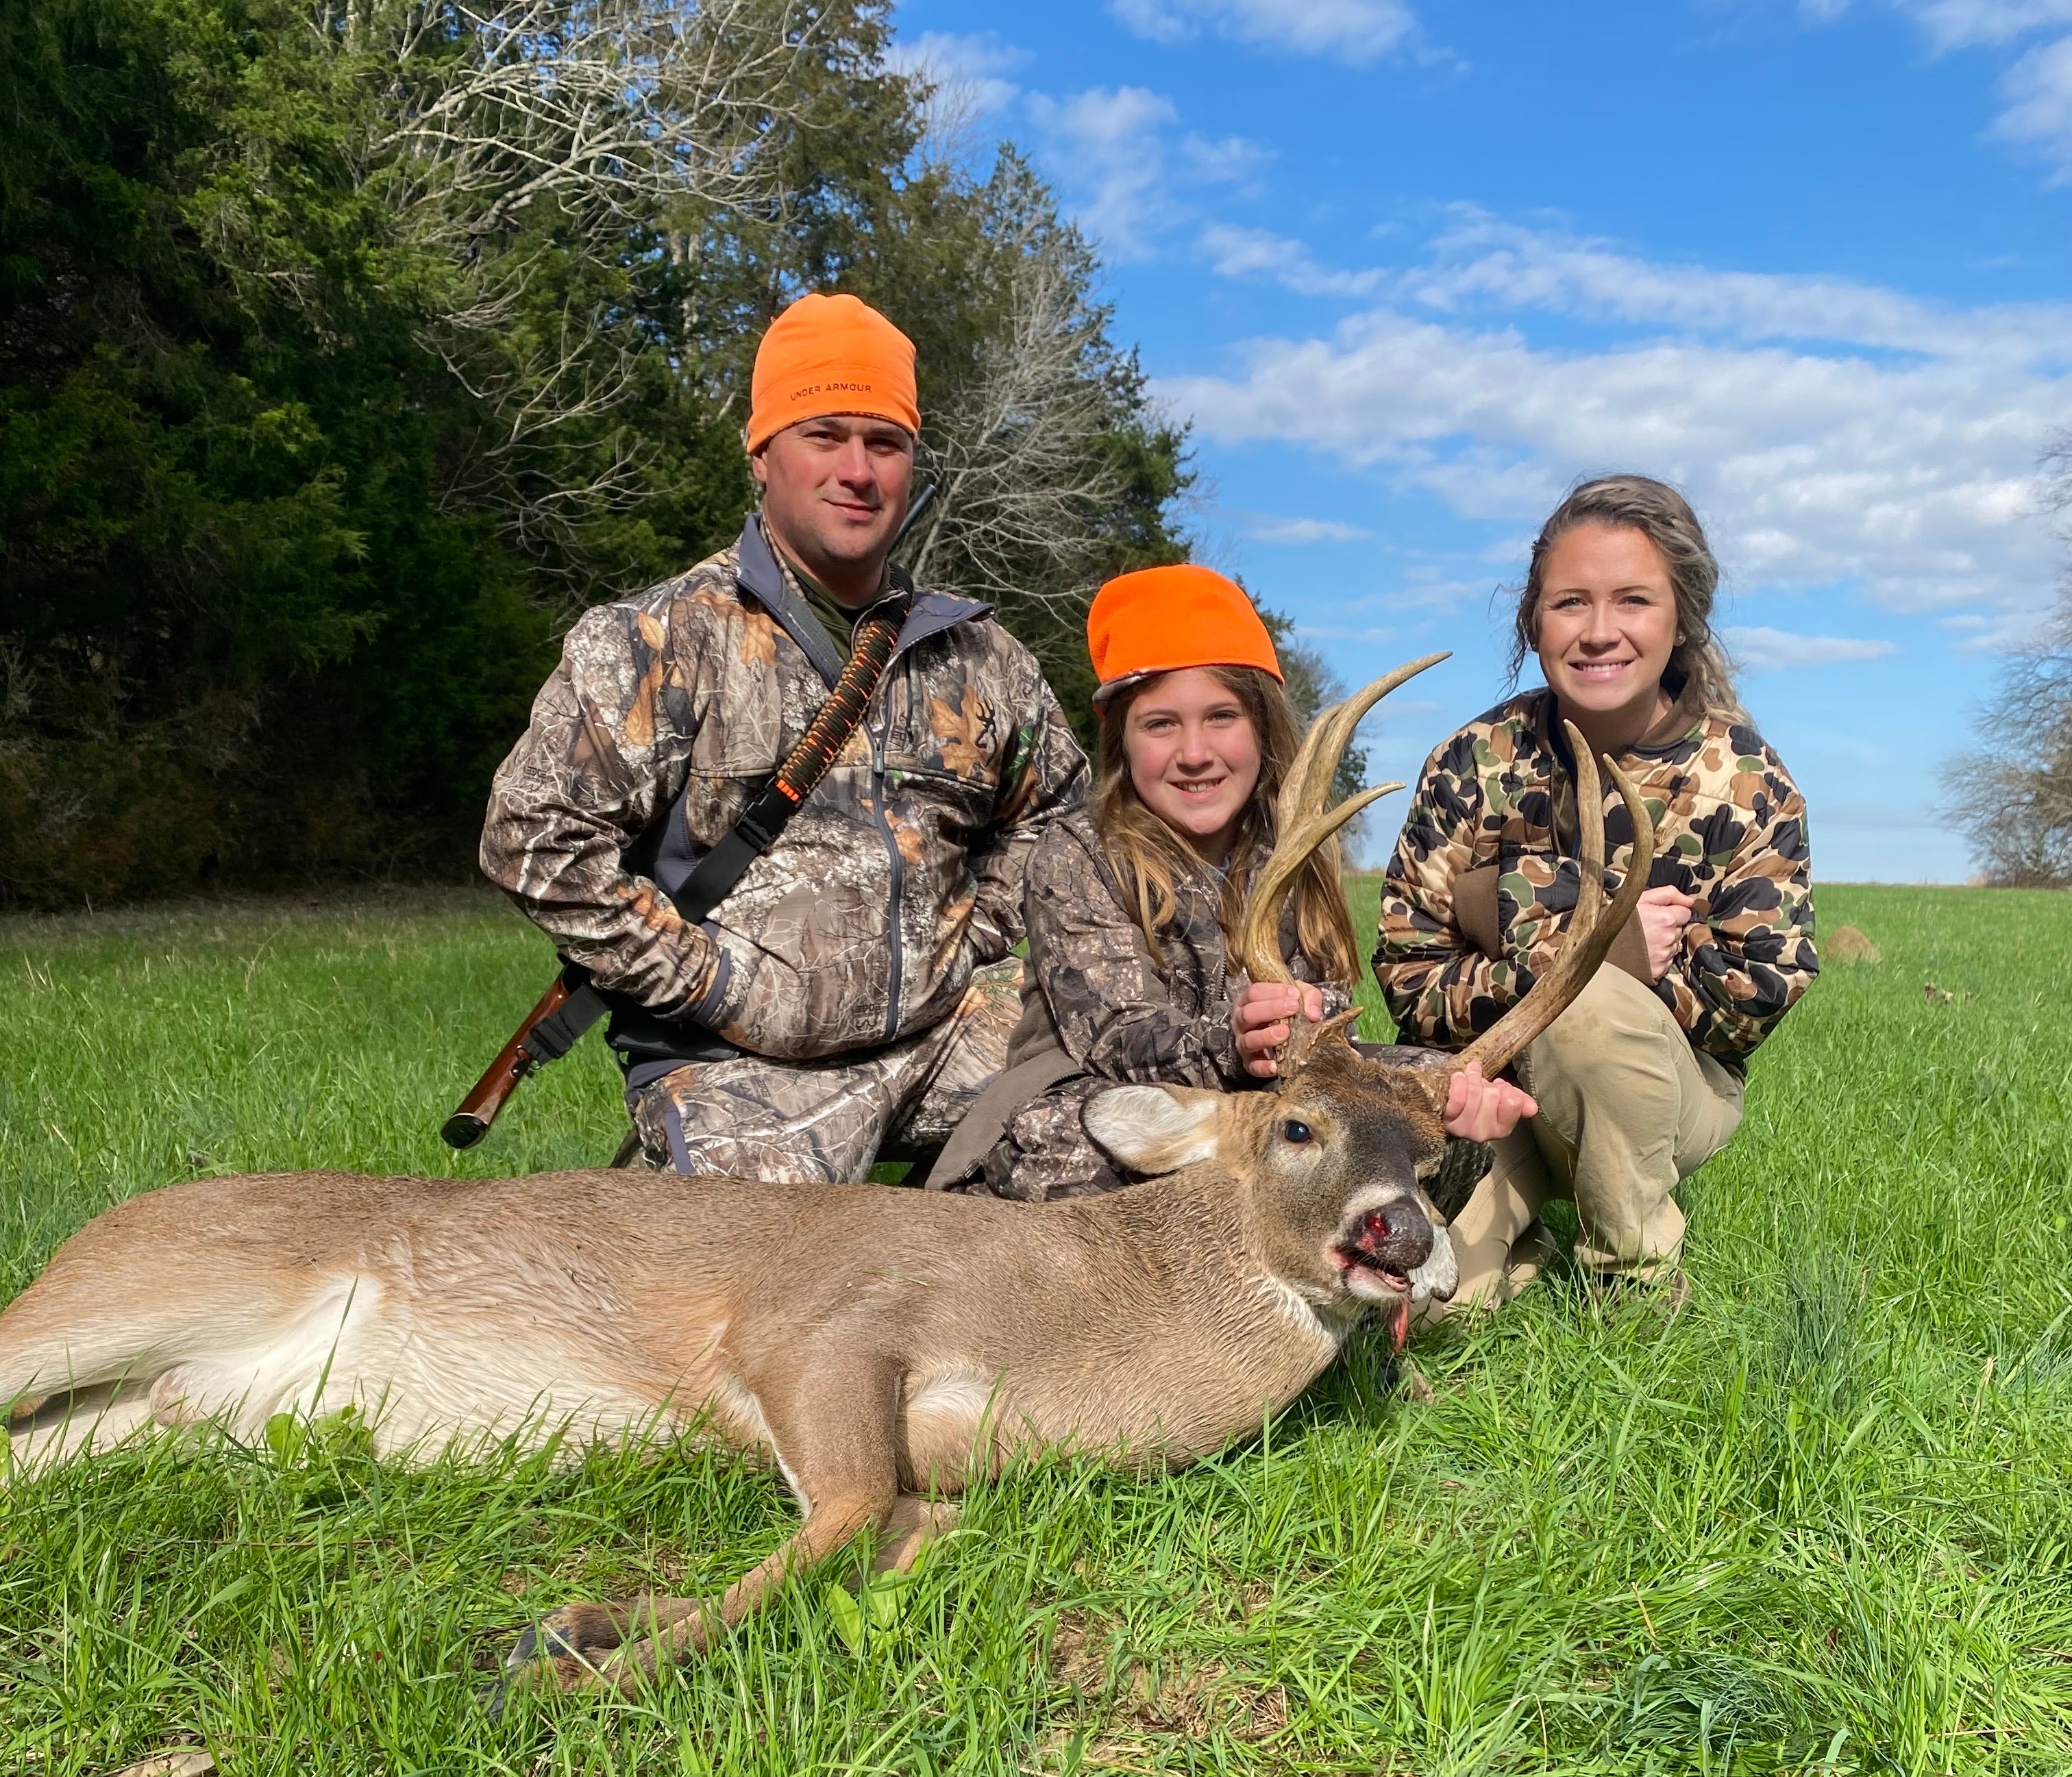 Nick Anderson, his daughter Presley, and Brae Buckner with ADCNR’s State Lands Division after a successful youth deer hunt at the M. Barnett Lawley Forever Wild Field Trial Area in Hale County.